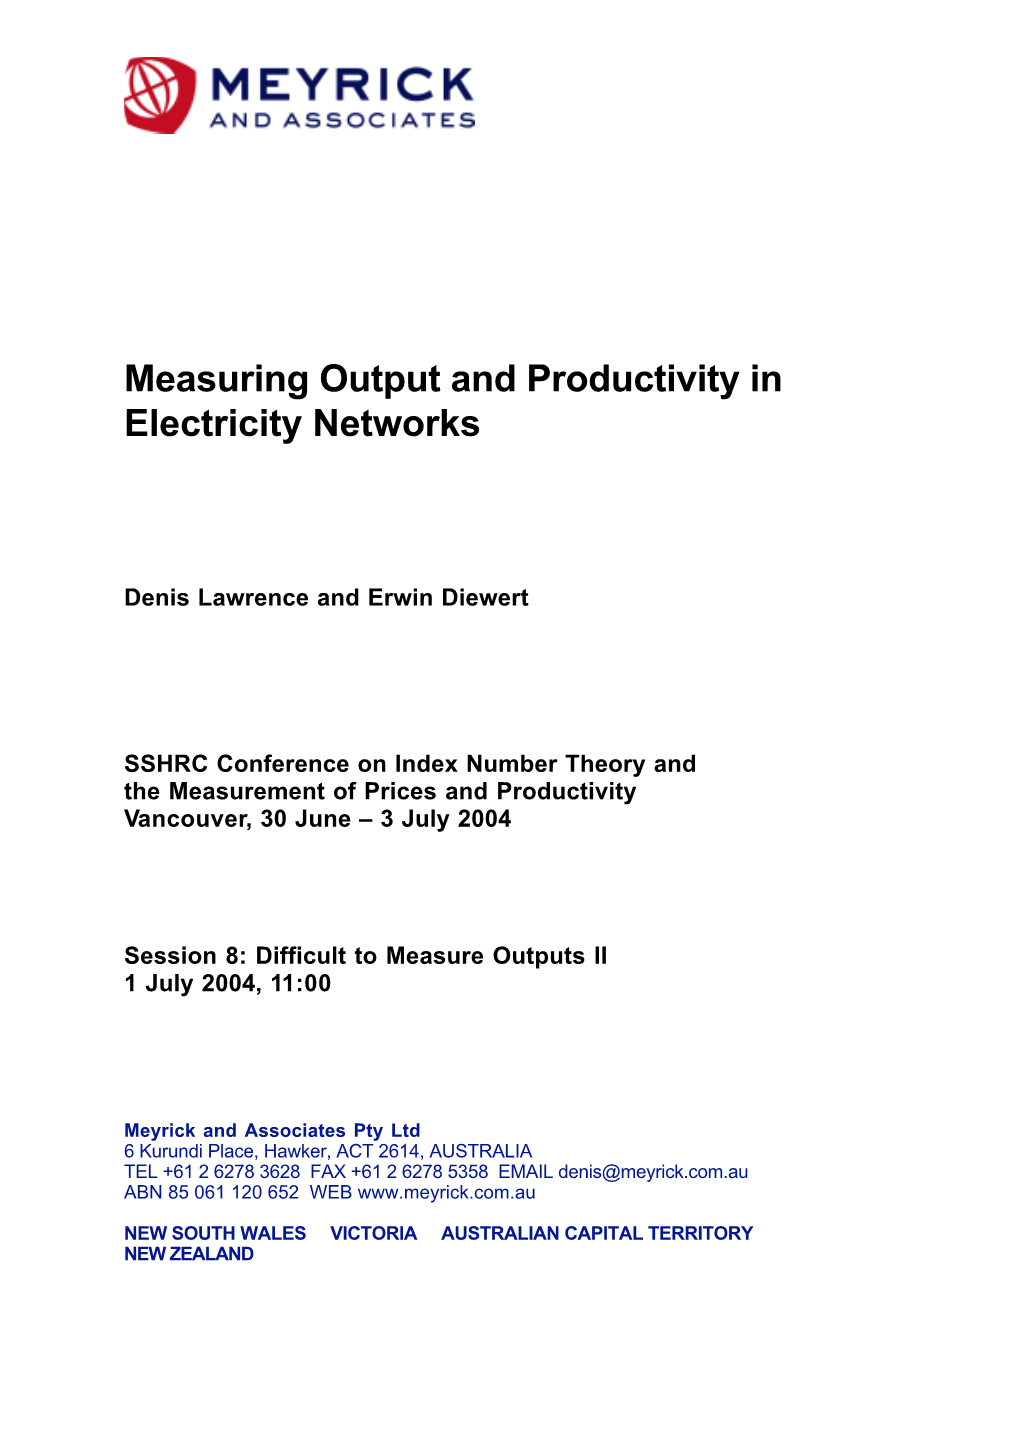 Measuring Output and Productivity in Electricity Networks